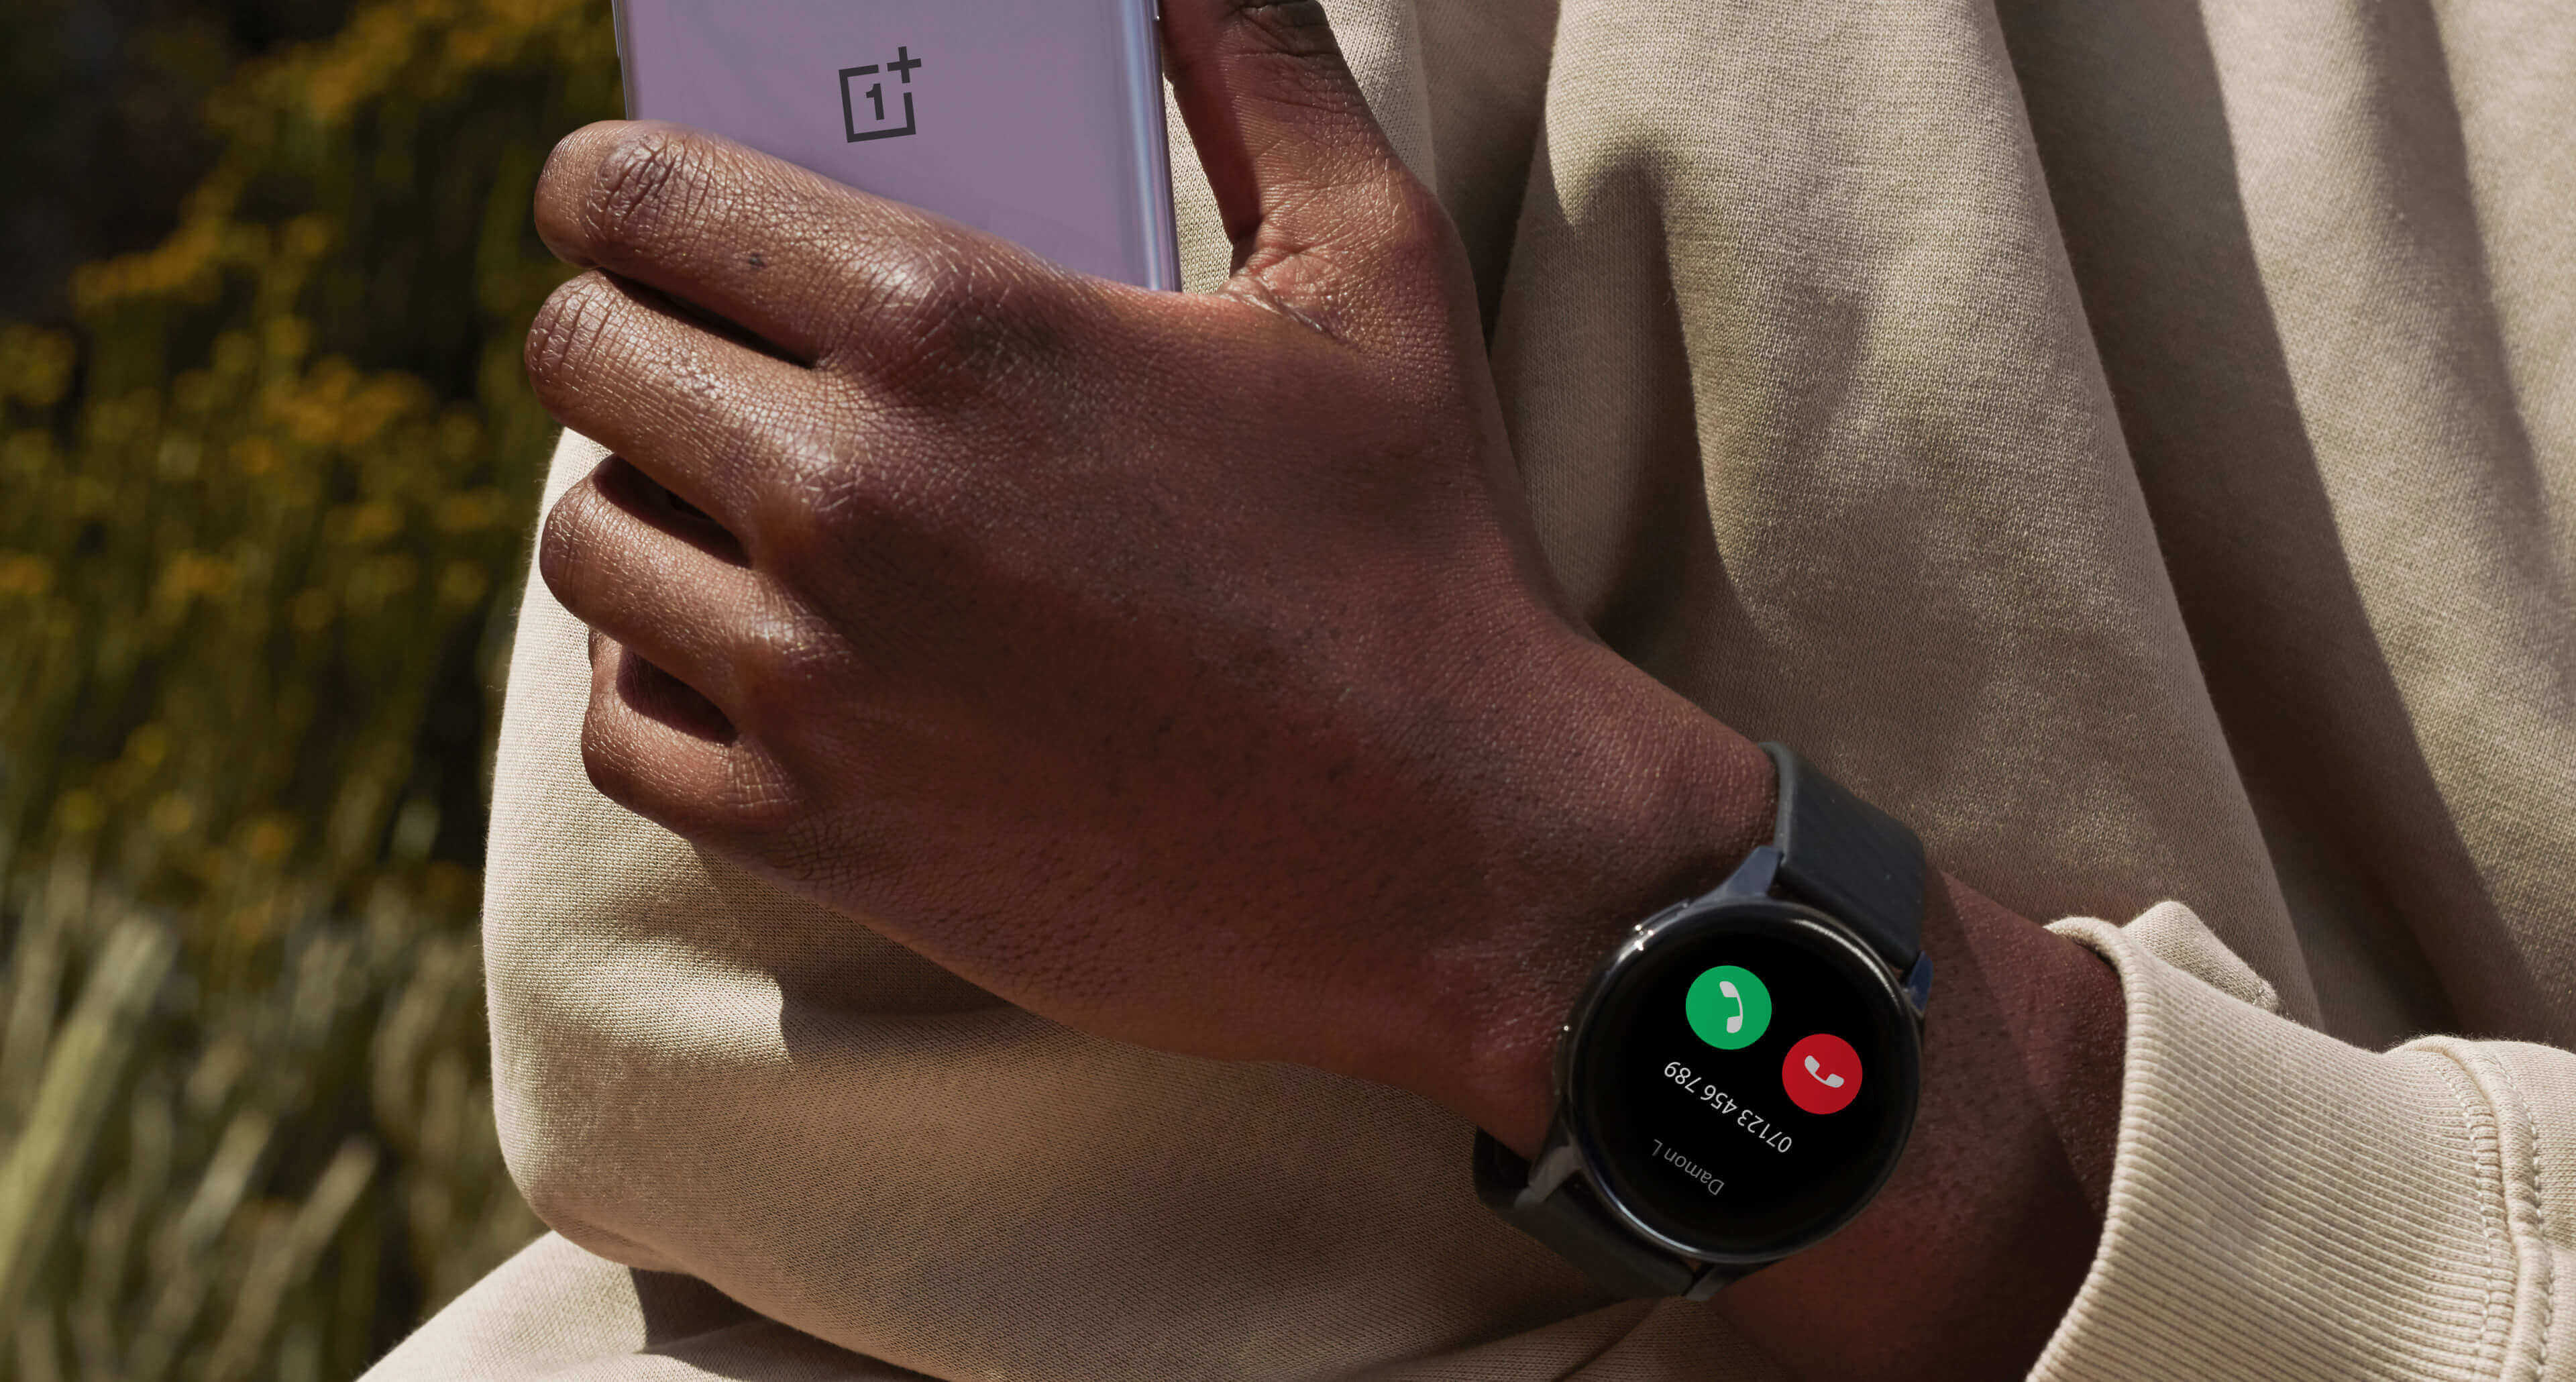 7 Smartwatches That Work Best with OnePlus Phones